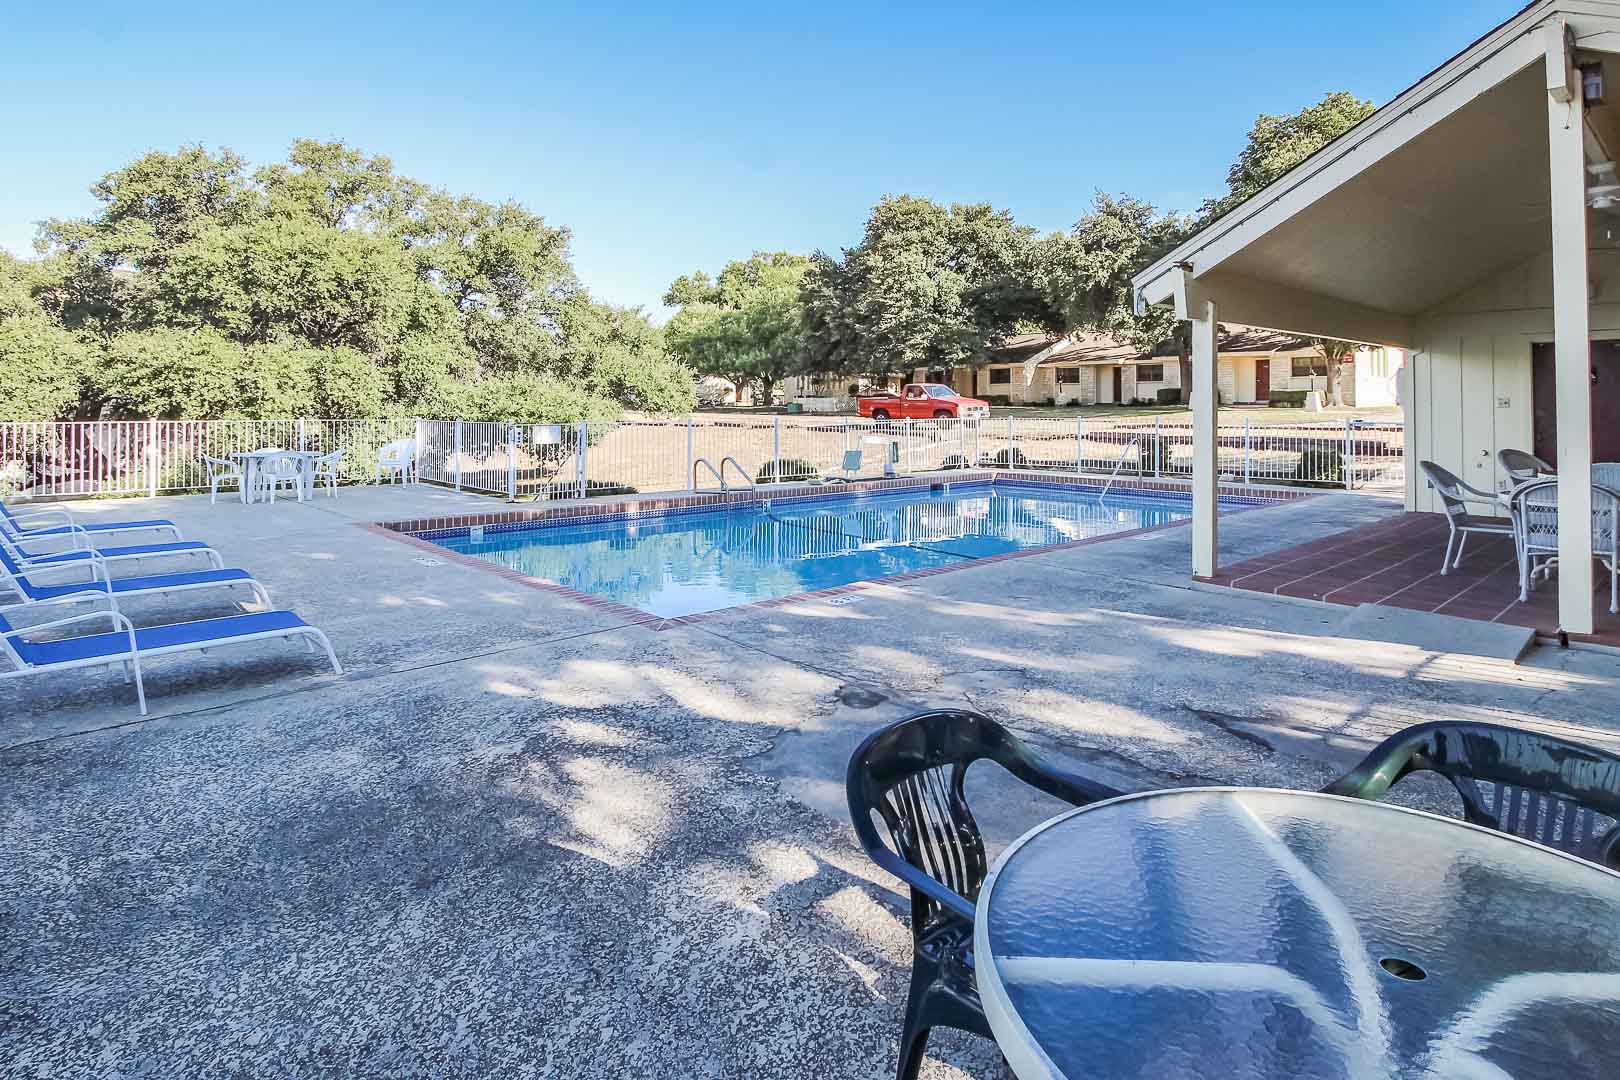 A peaceful outdoor swimming pool  at VRI's Vacation Village at Lake Travis in Texas.